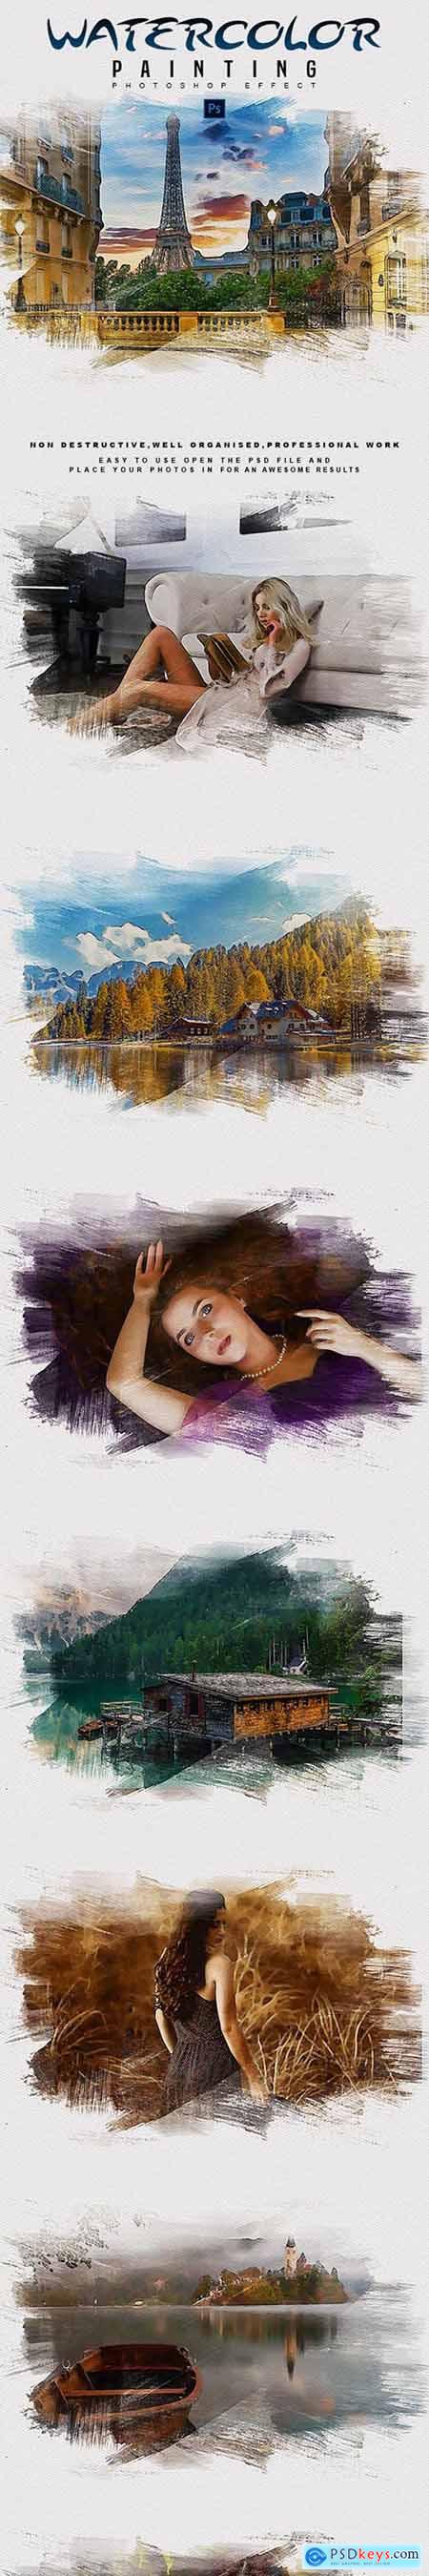 Watercolor Painting - Photoshop Effect 28936851